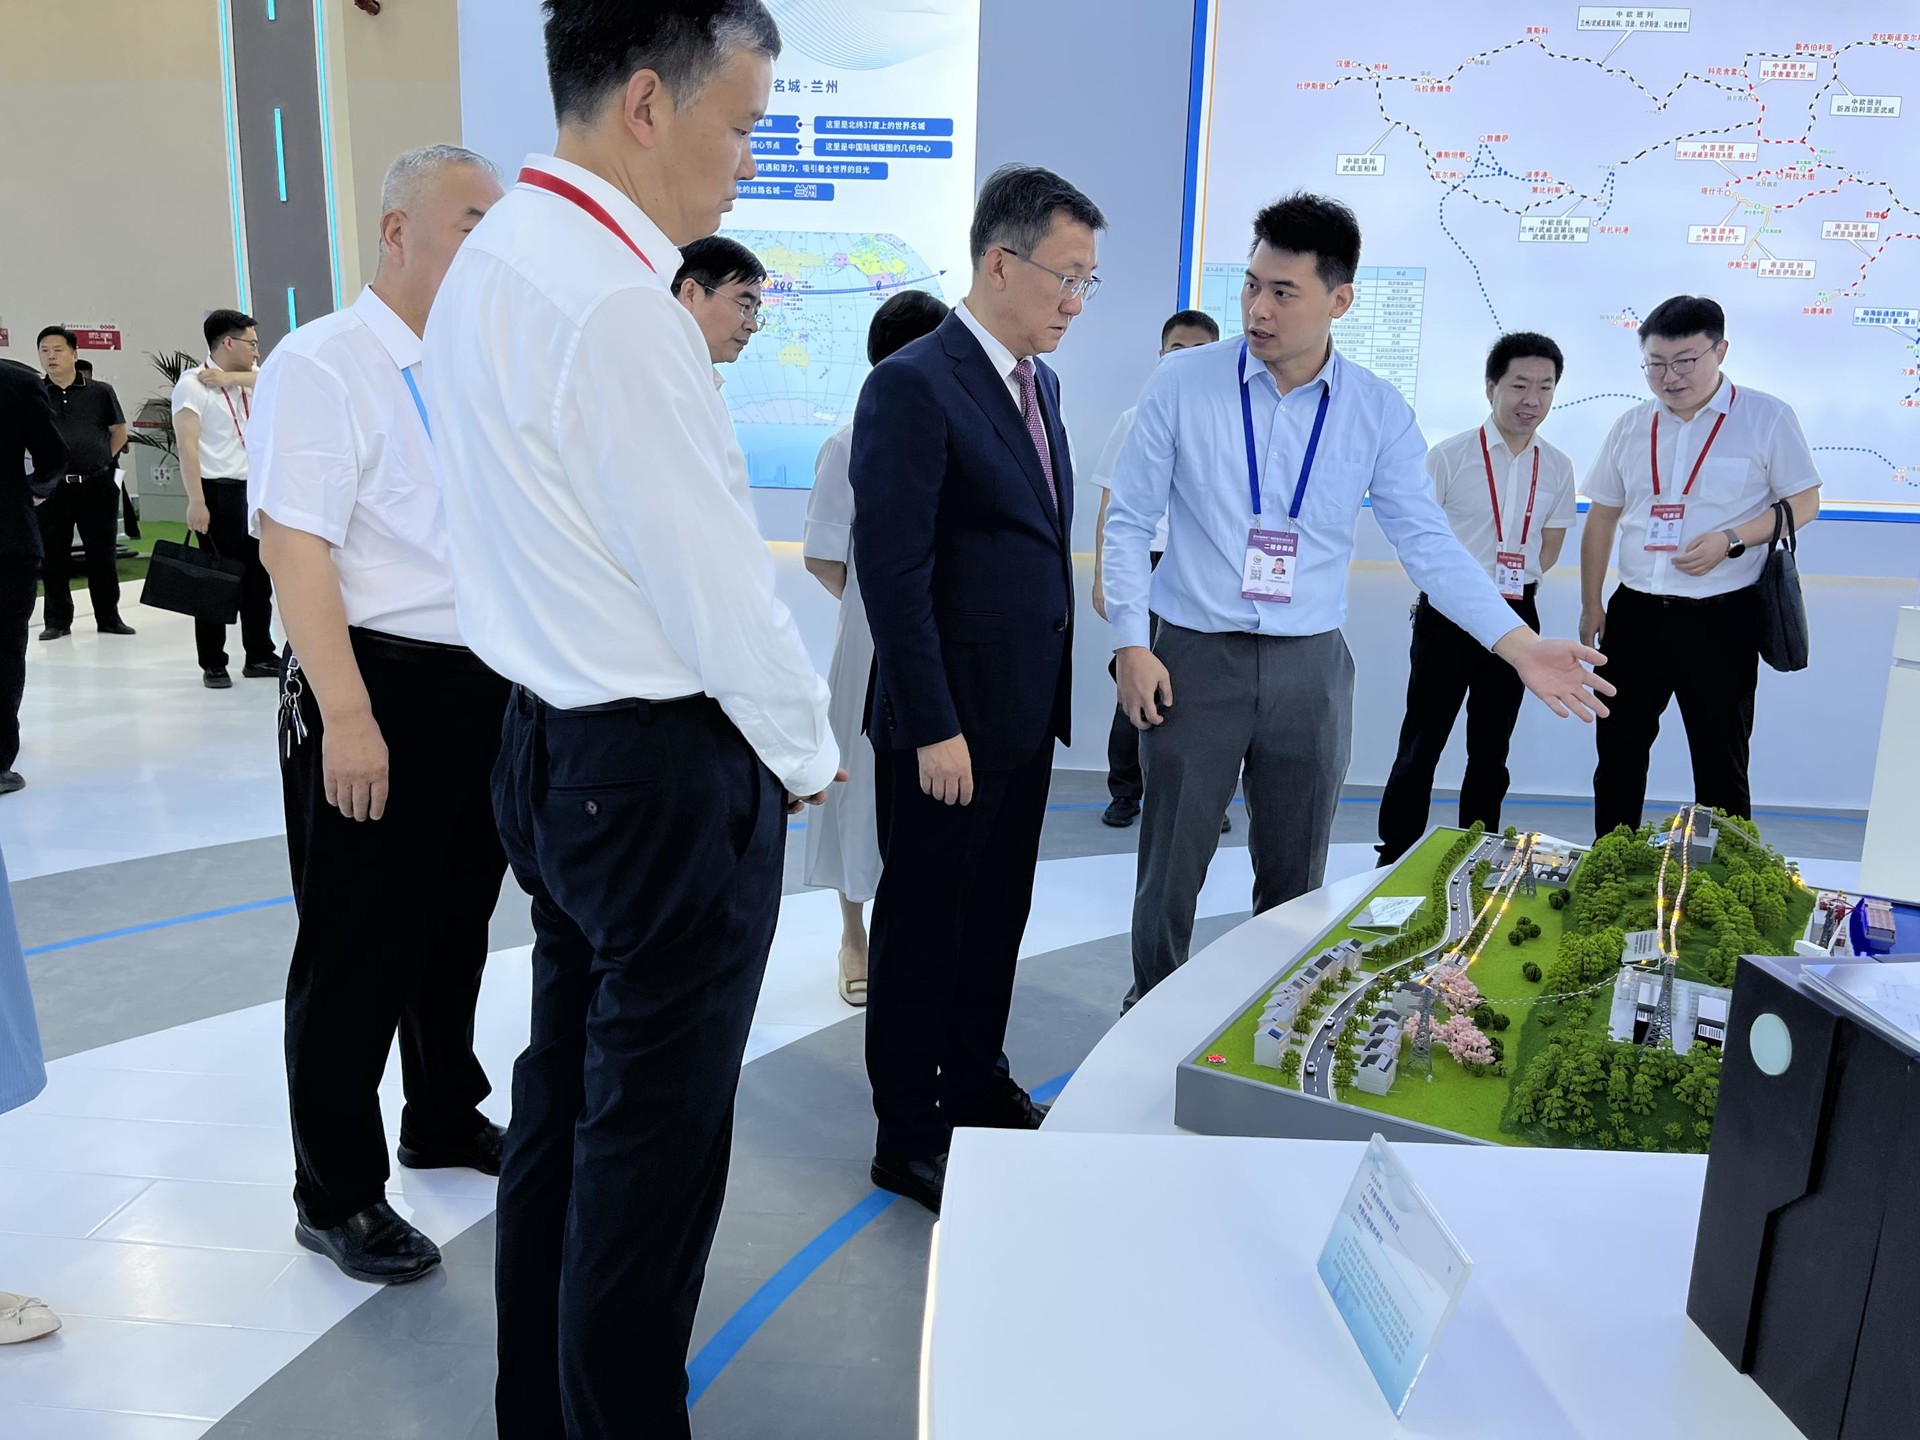 The 29th Lanzhou Foreign Trade Fair opened, and hydrogen energy high-tech products became the focus